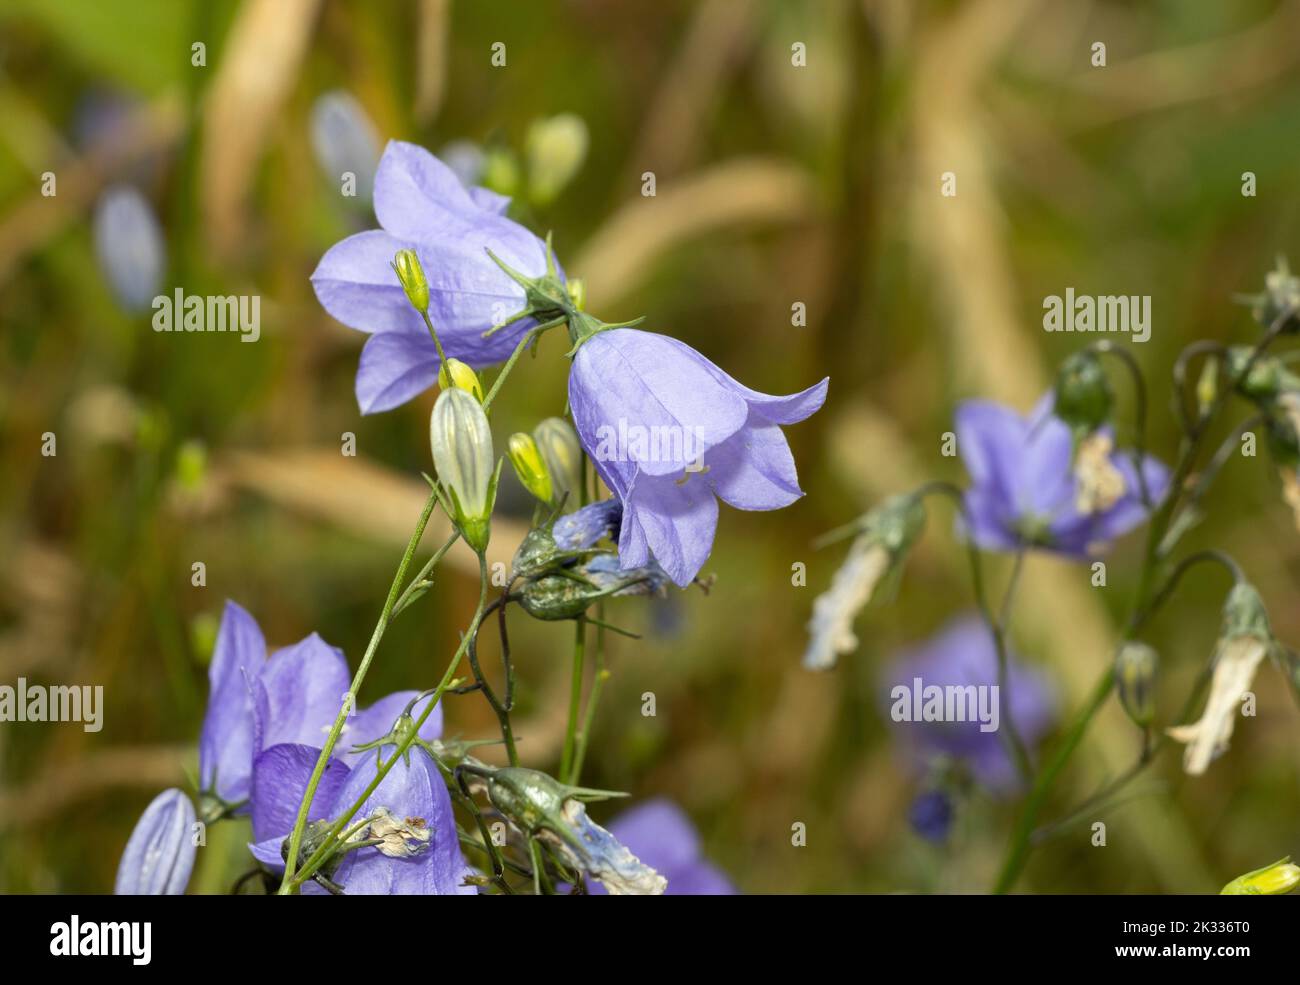 A flower of the British summer, the Harebell delicately nods its bell-shaped flowers in the breeze. They prefer calcareous soils and grassy heaths Stock Photo